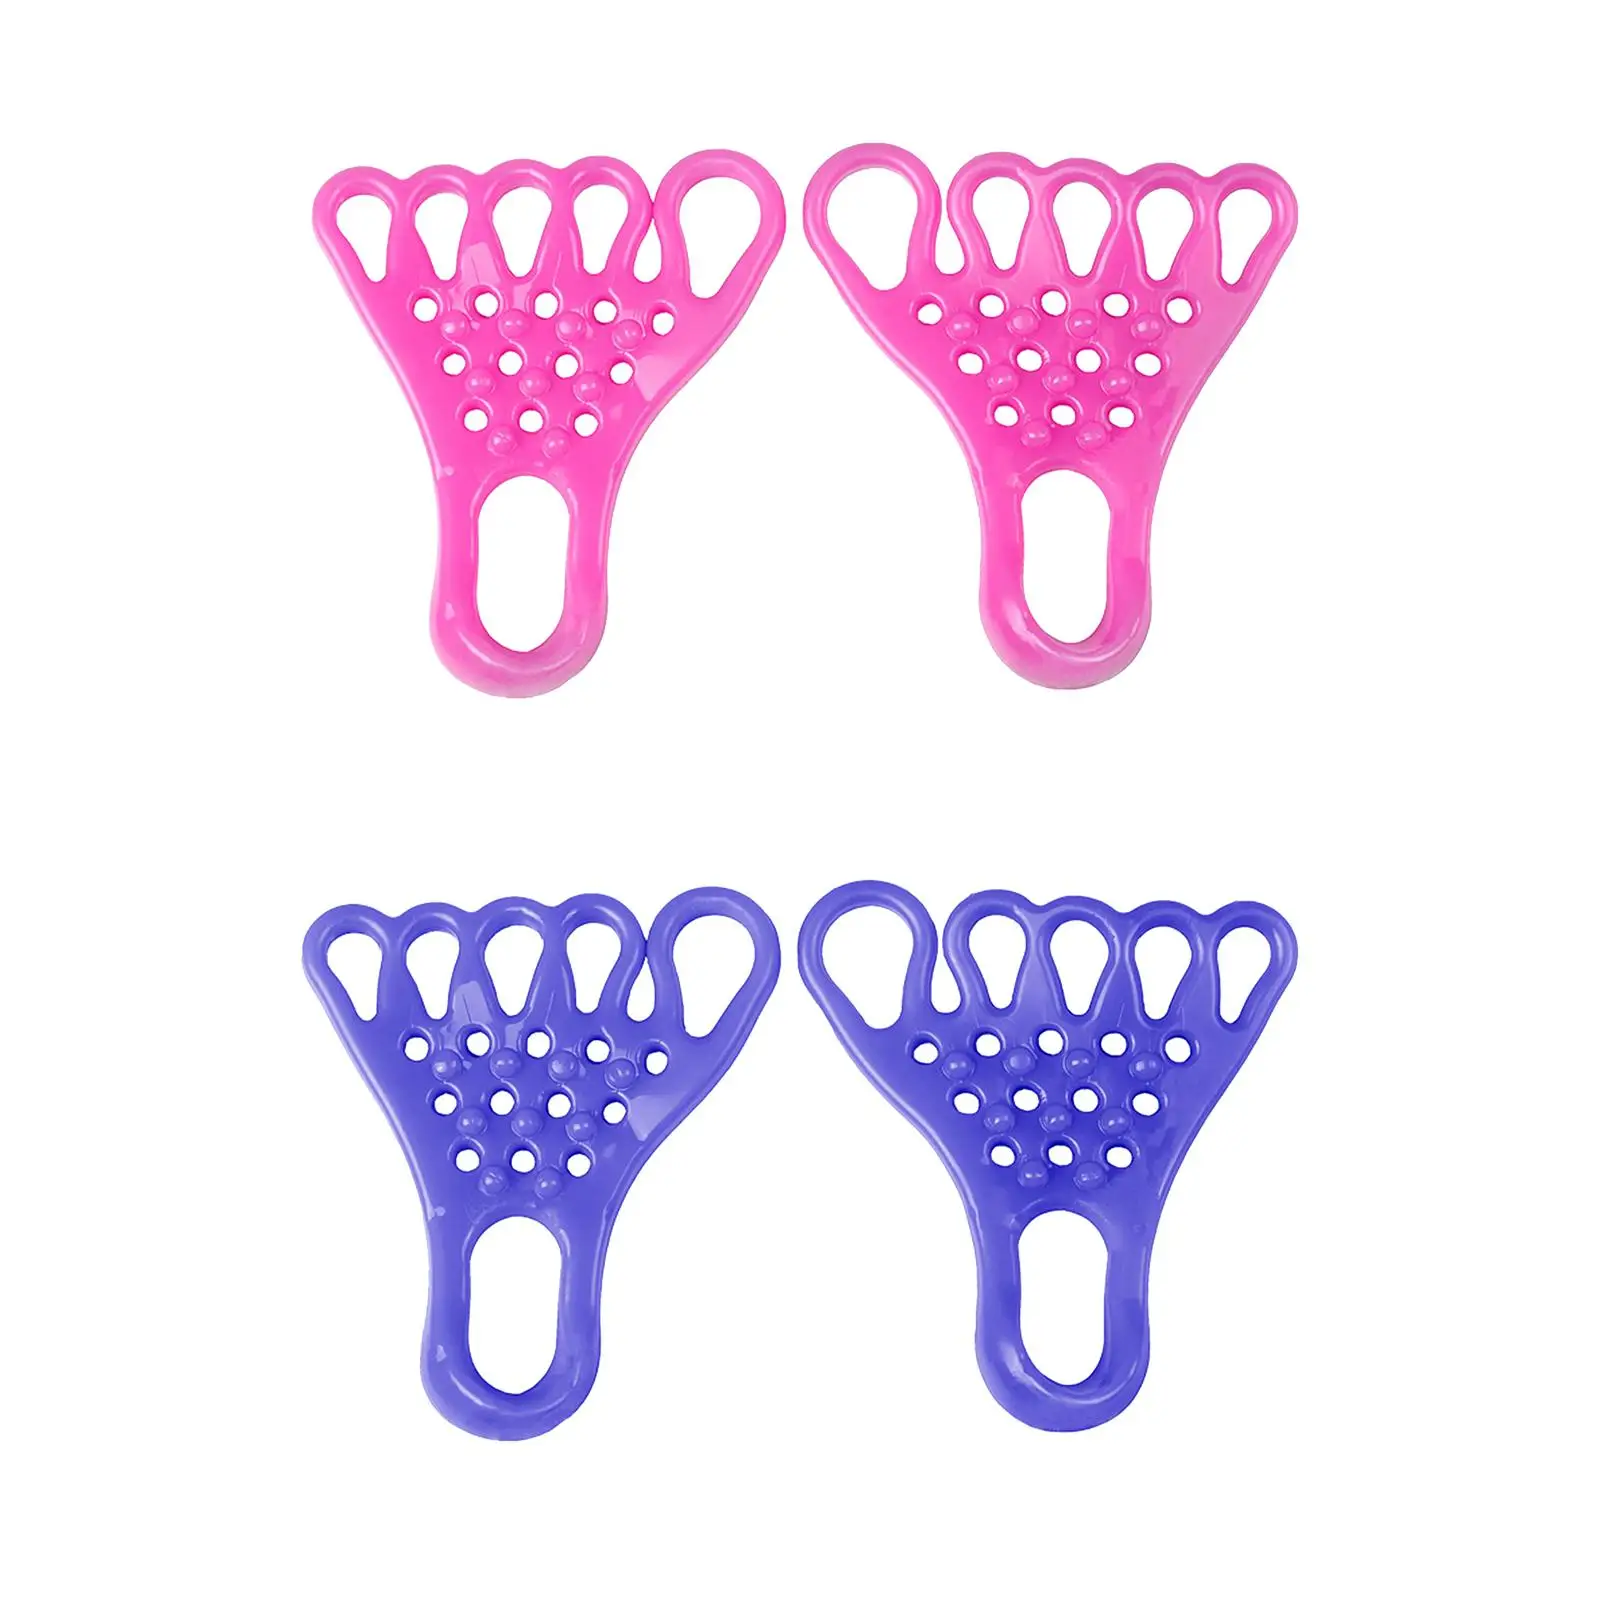 Toe Straightener Toe Protector Nail Tools Bunion Corrector Toe Spacer Toe Separators for Curled Toes Overlapping Toes Bunions